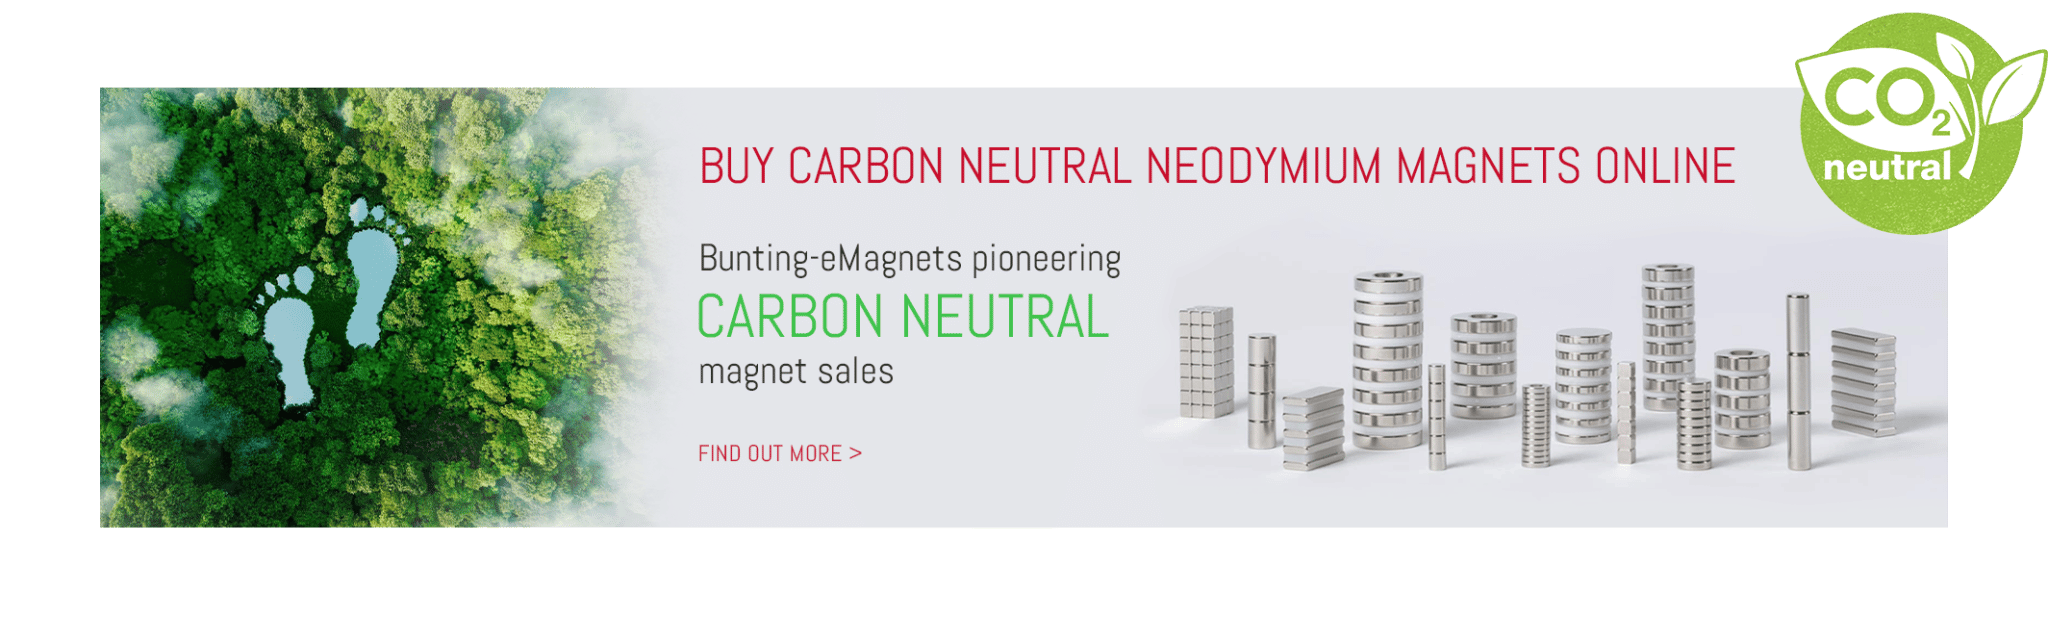 Carbon neutral neodymium magnets pioneered by E-Magnets UK